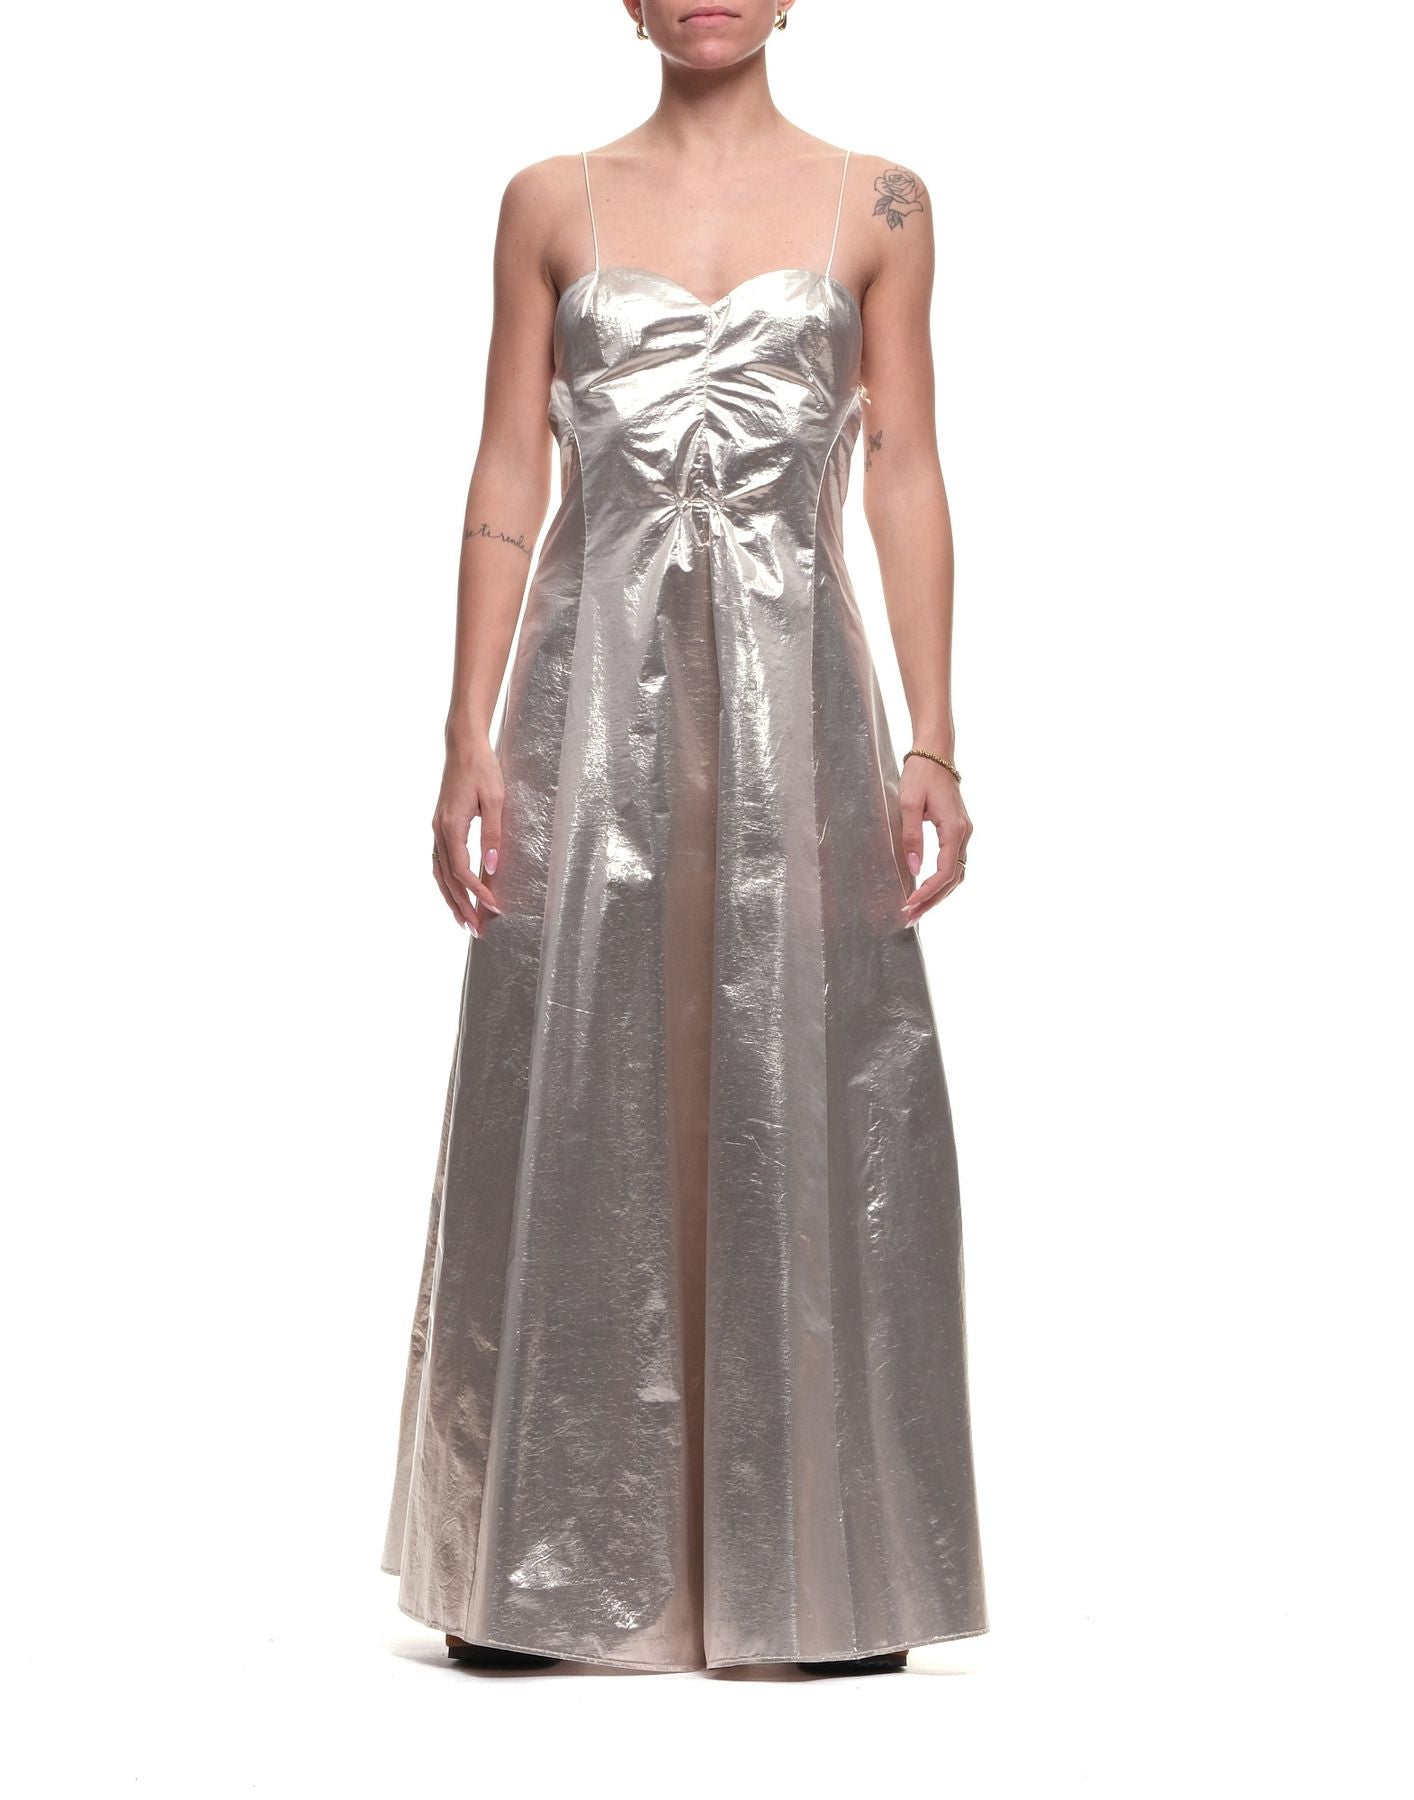 Robe pour femme 12324 ma robe argent FORTE_FORTE